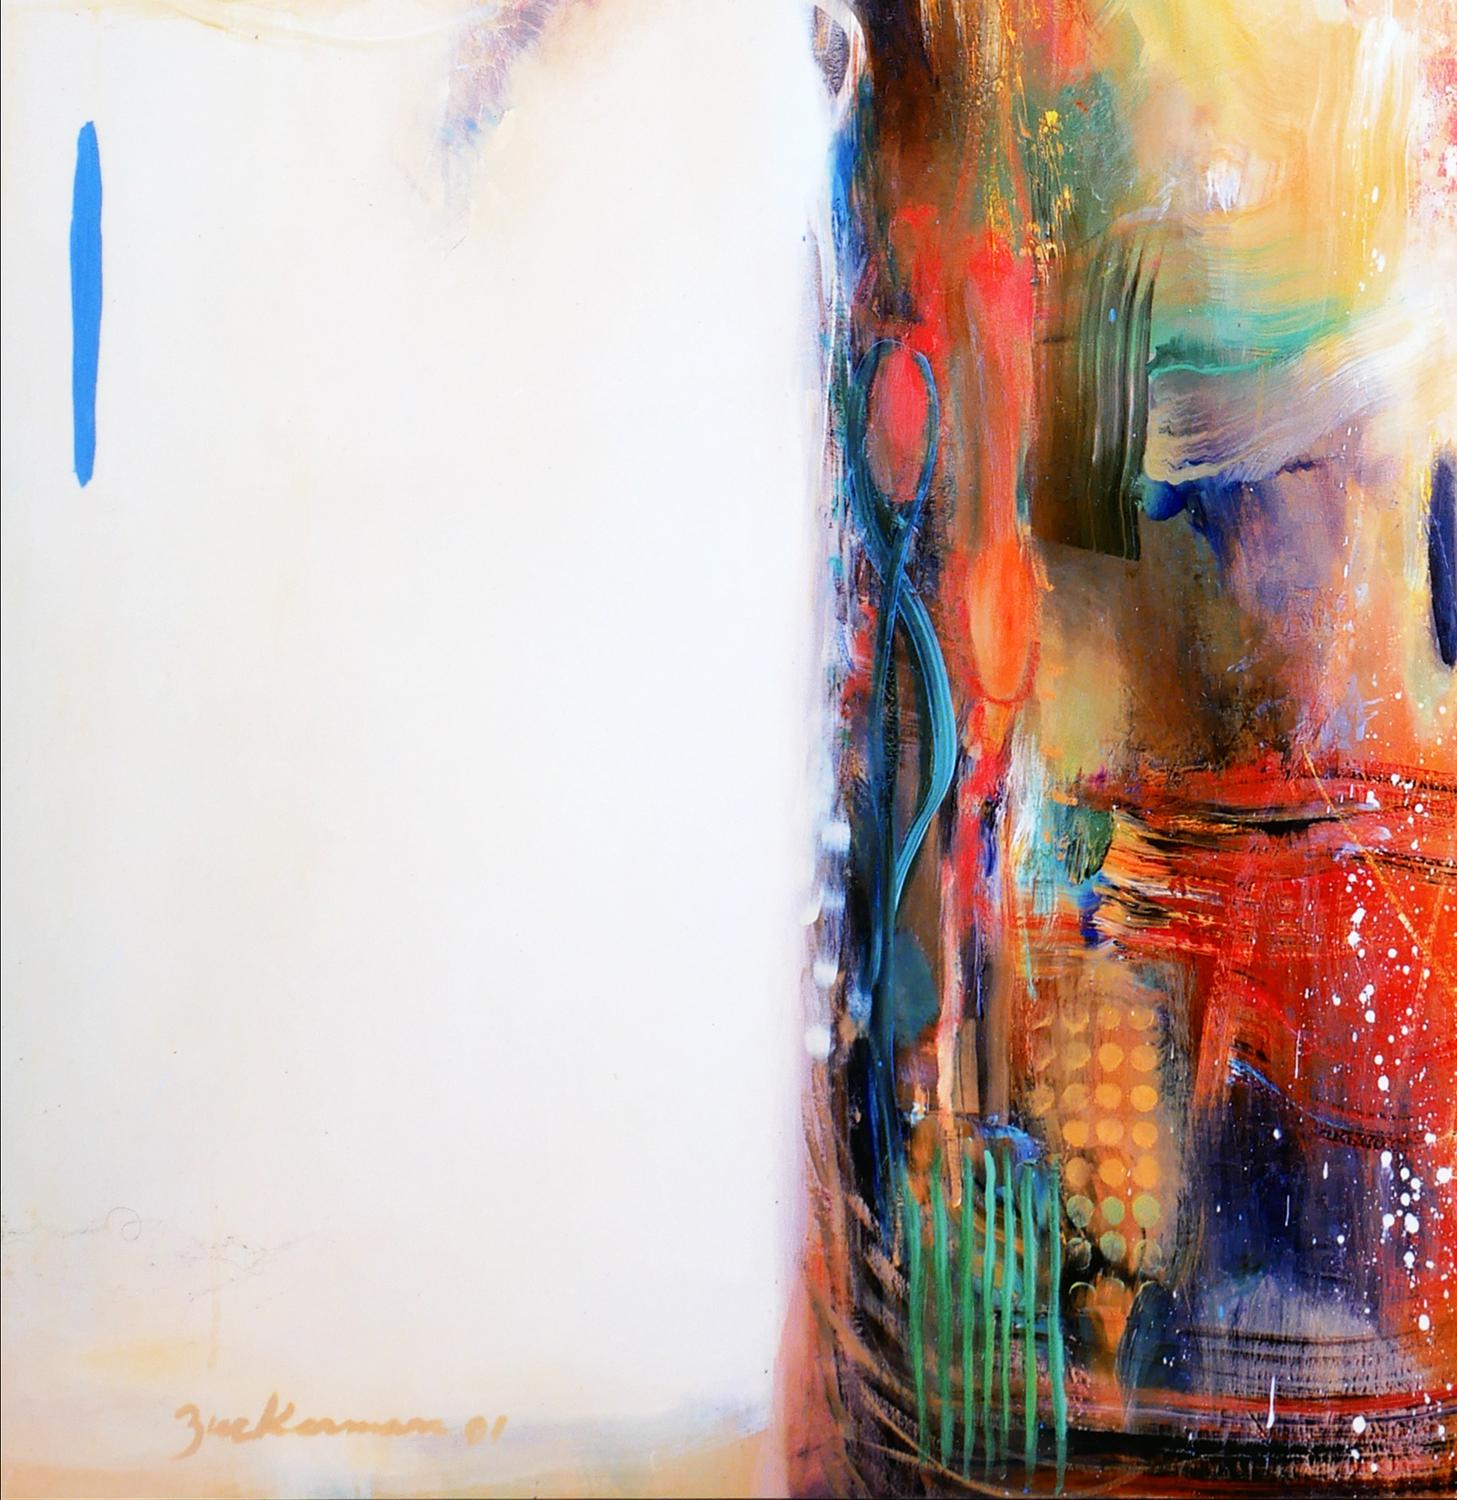 Orange and blue abstract figurative painting by Kevin Zuckerman. The print depicts a colorful male figure against a yellow-orange-toned background. The work is mounted metal and is signed and dated by the artist at the bottom right. Unframed but